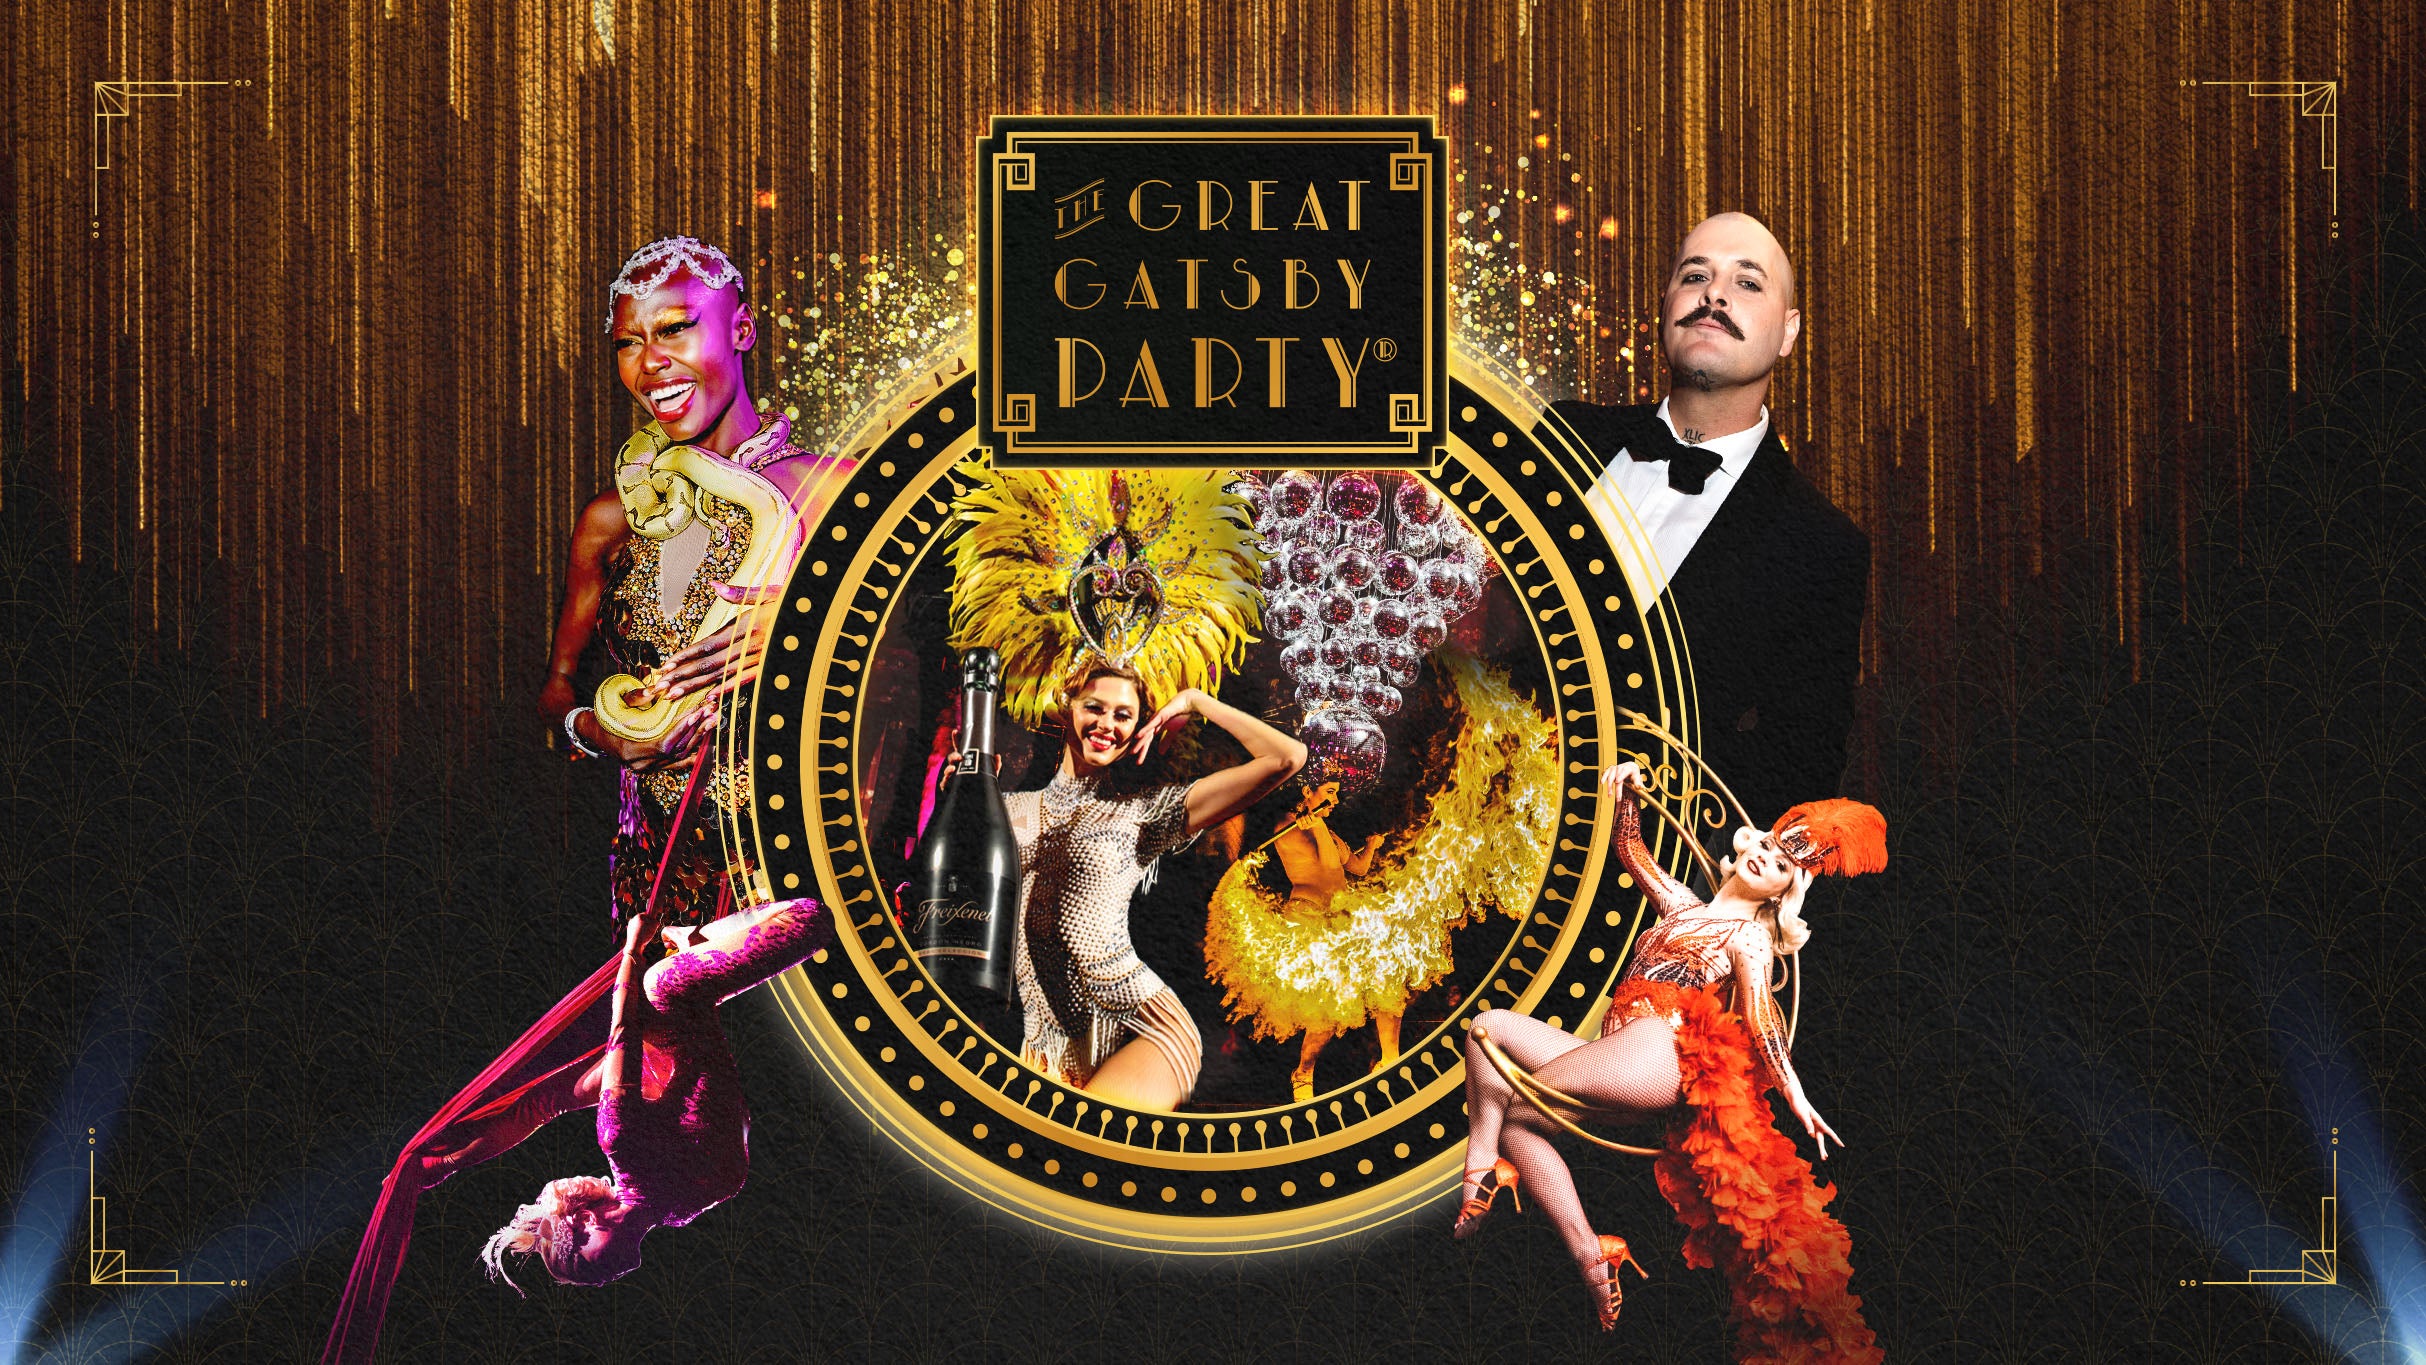 The Great Gatsby Party - Los Angeles - Los Angeles, CA 90014